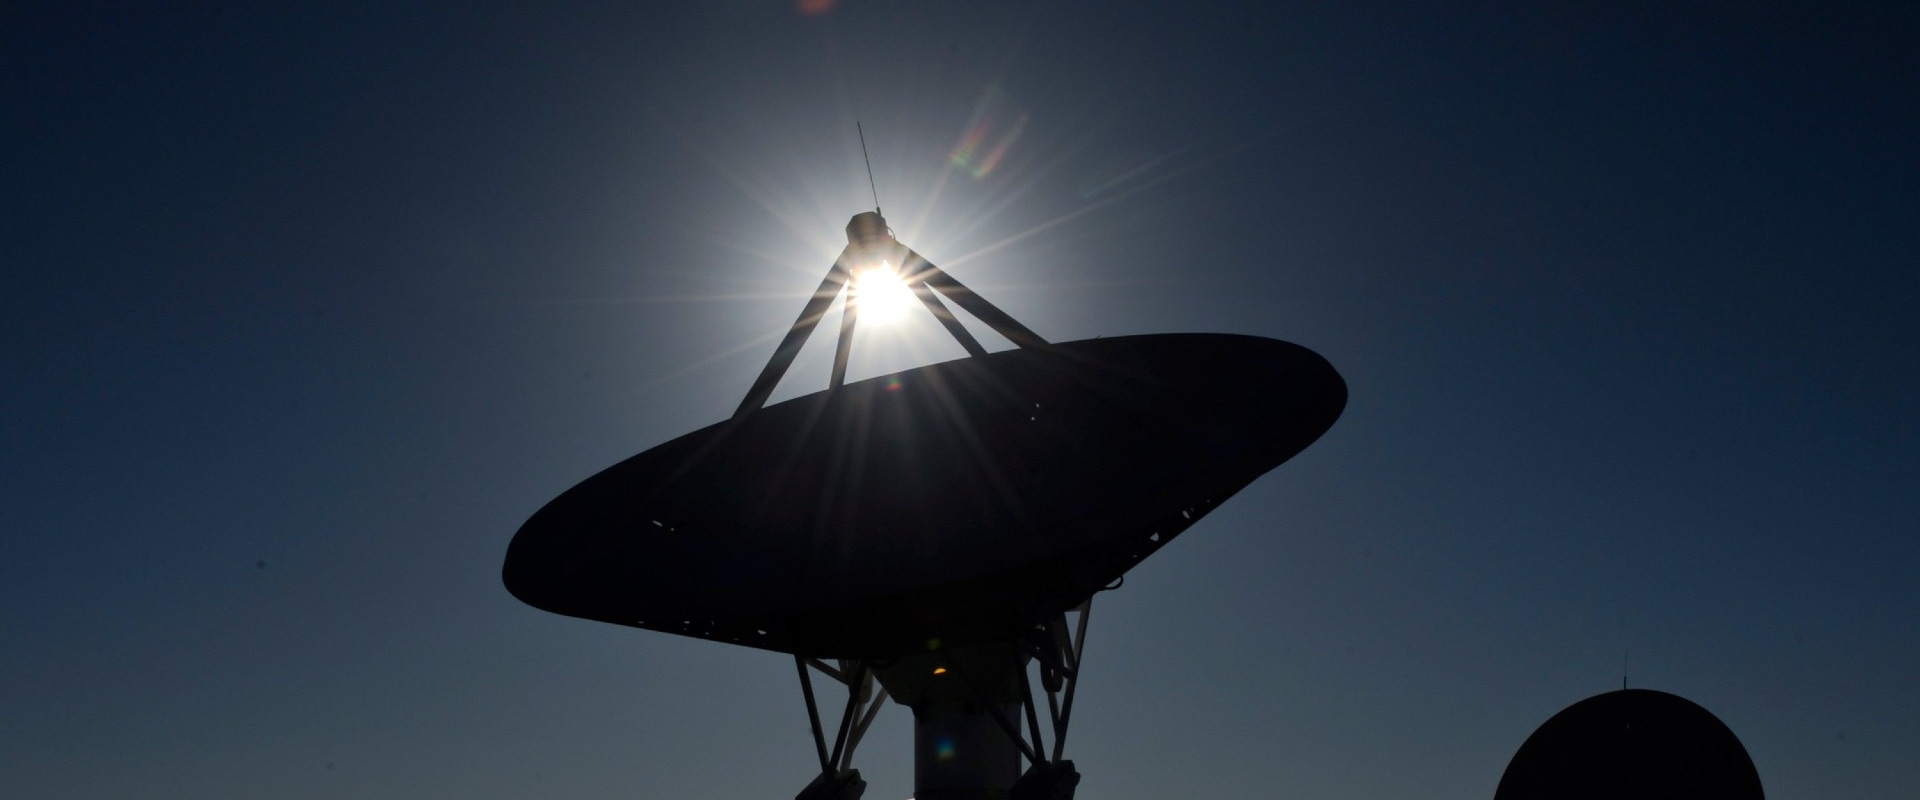 New Technology and Methods in the Search for Extraterrestrial Life